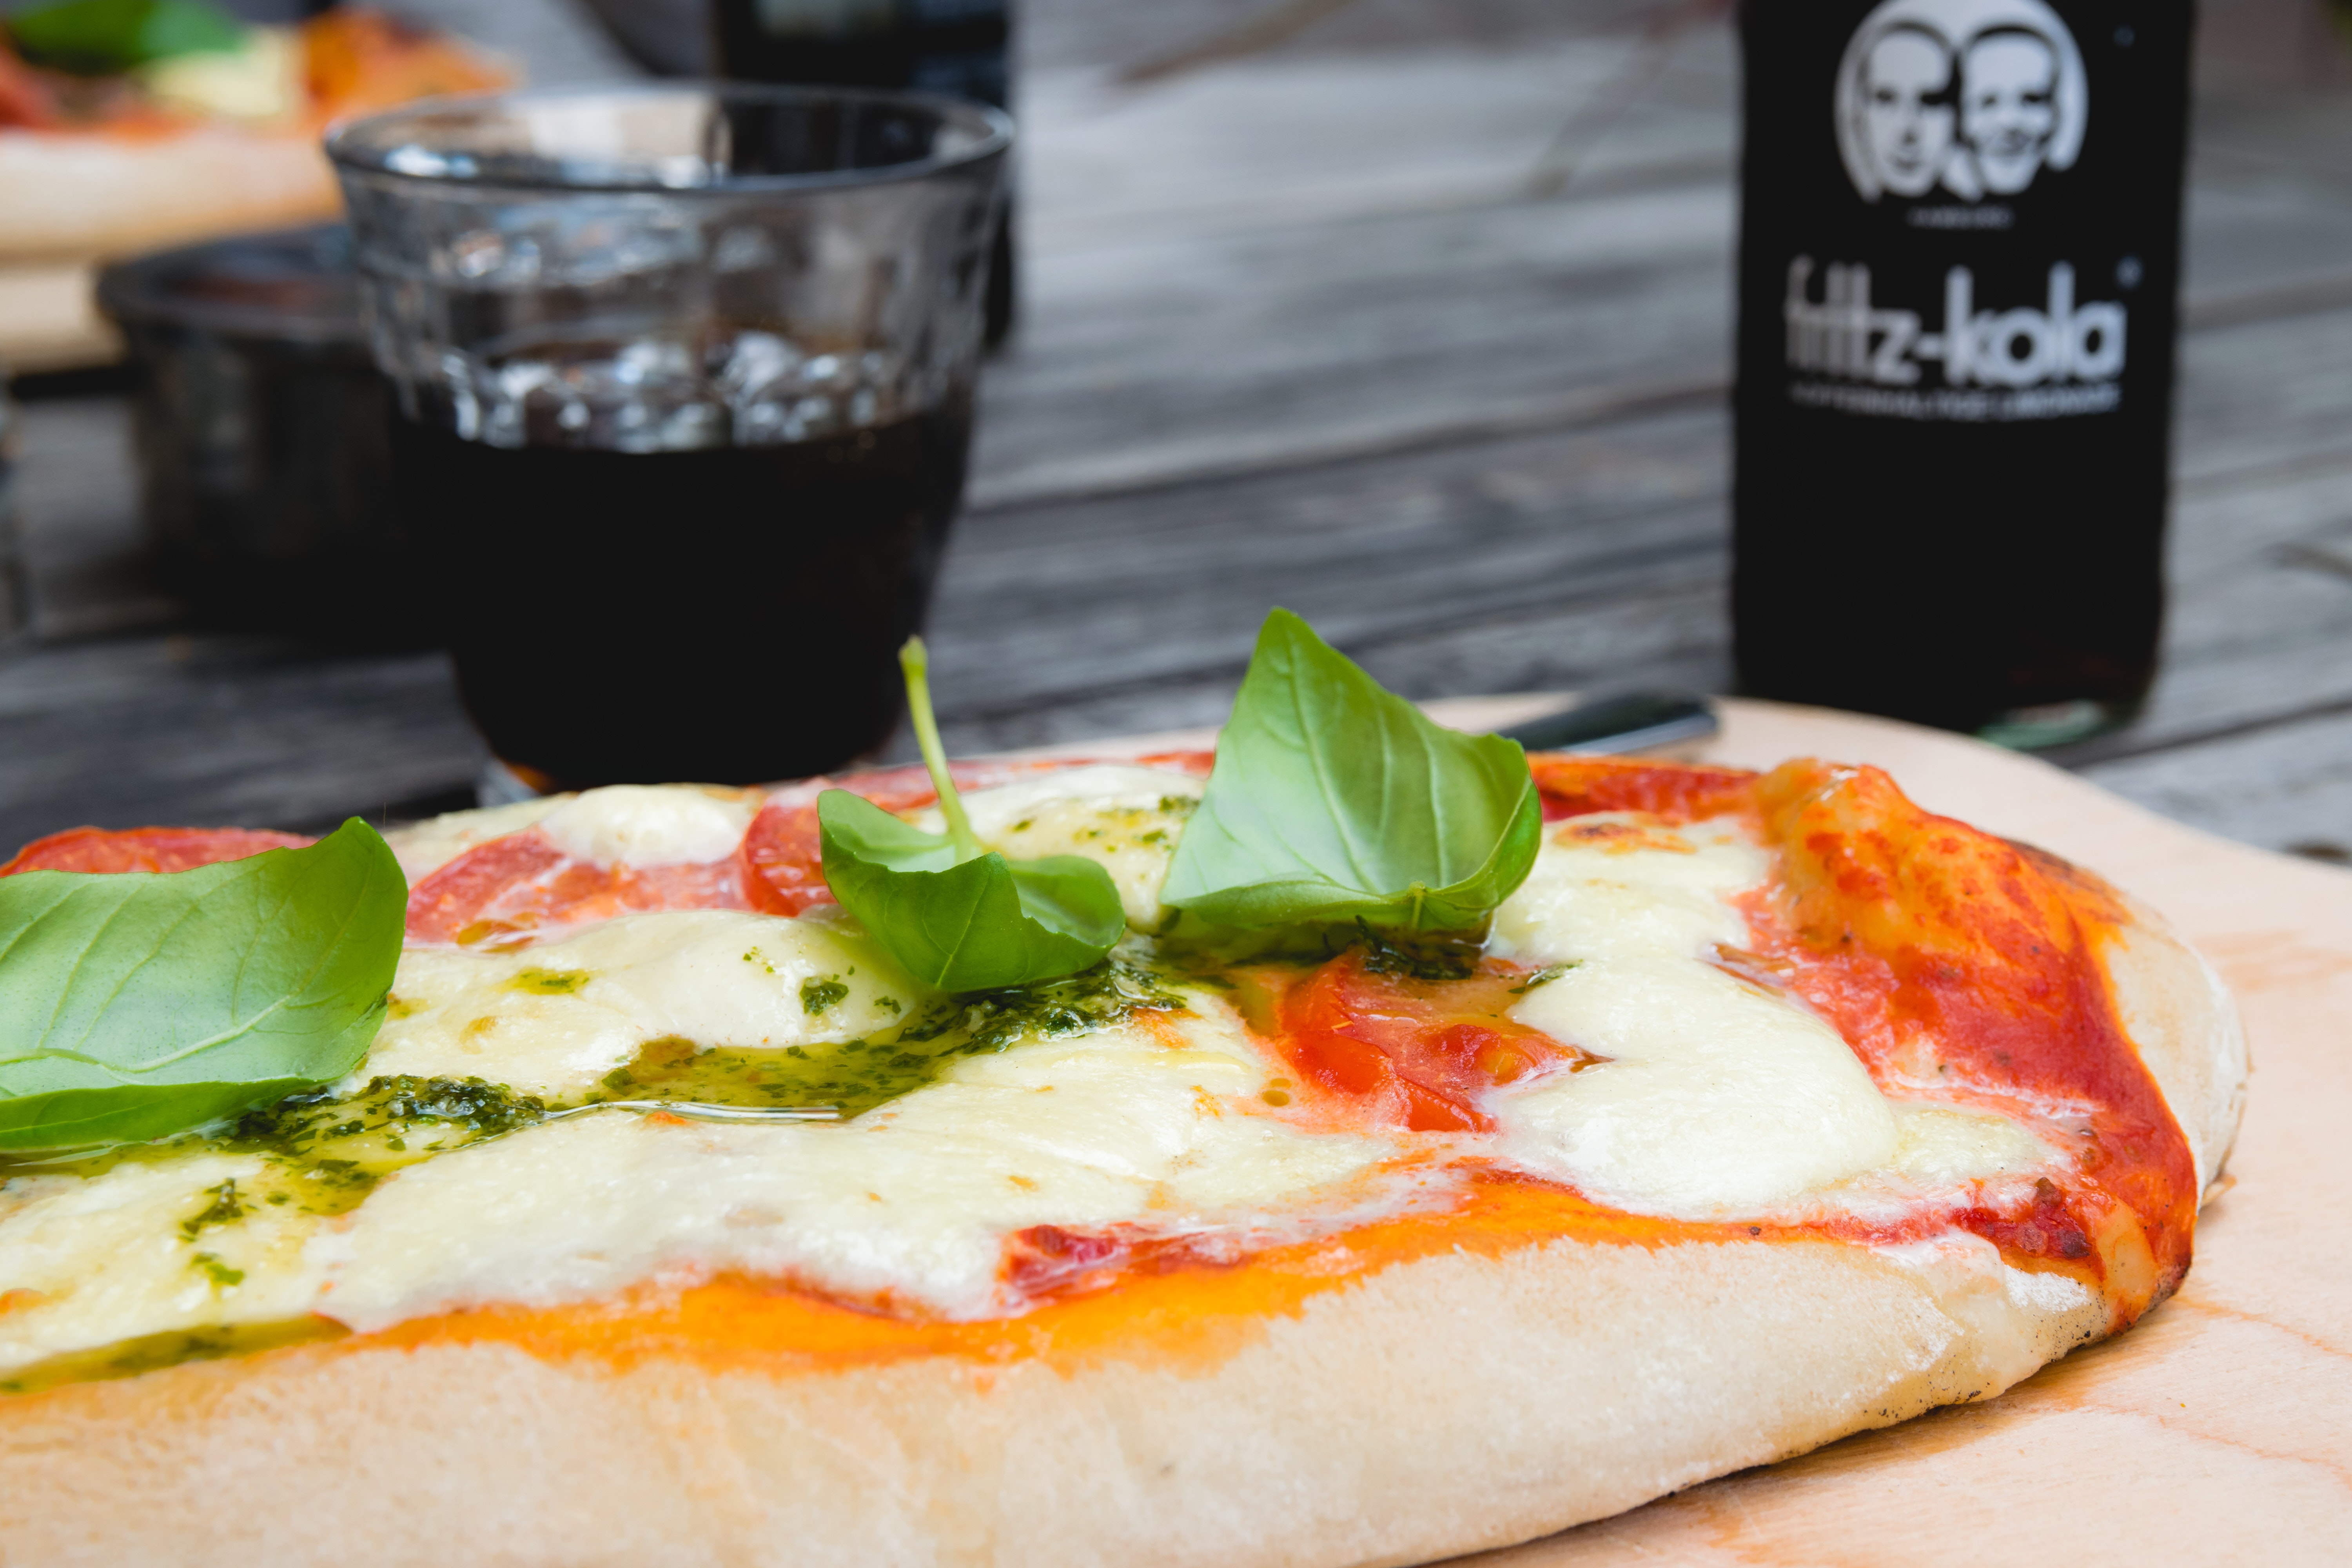 Pizza Top With Green Leafy Vegetable Near Glass of Black Liquid, Basil, Mozzarella, Wooden table, Tomatoes, HQ Photo